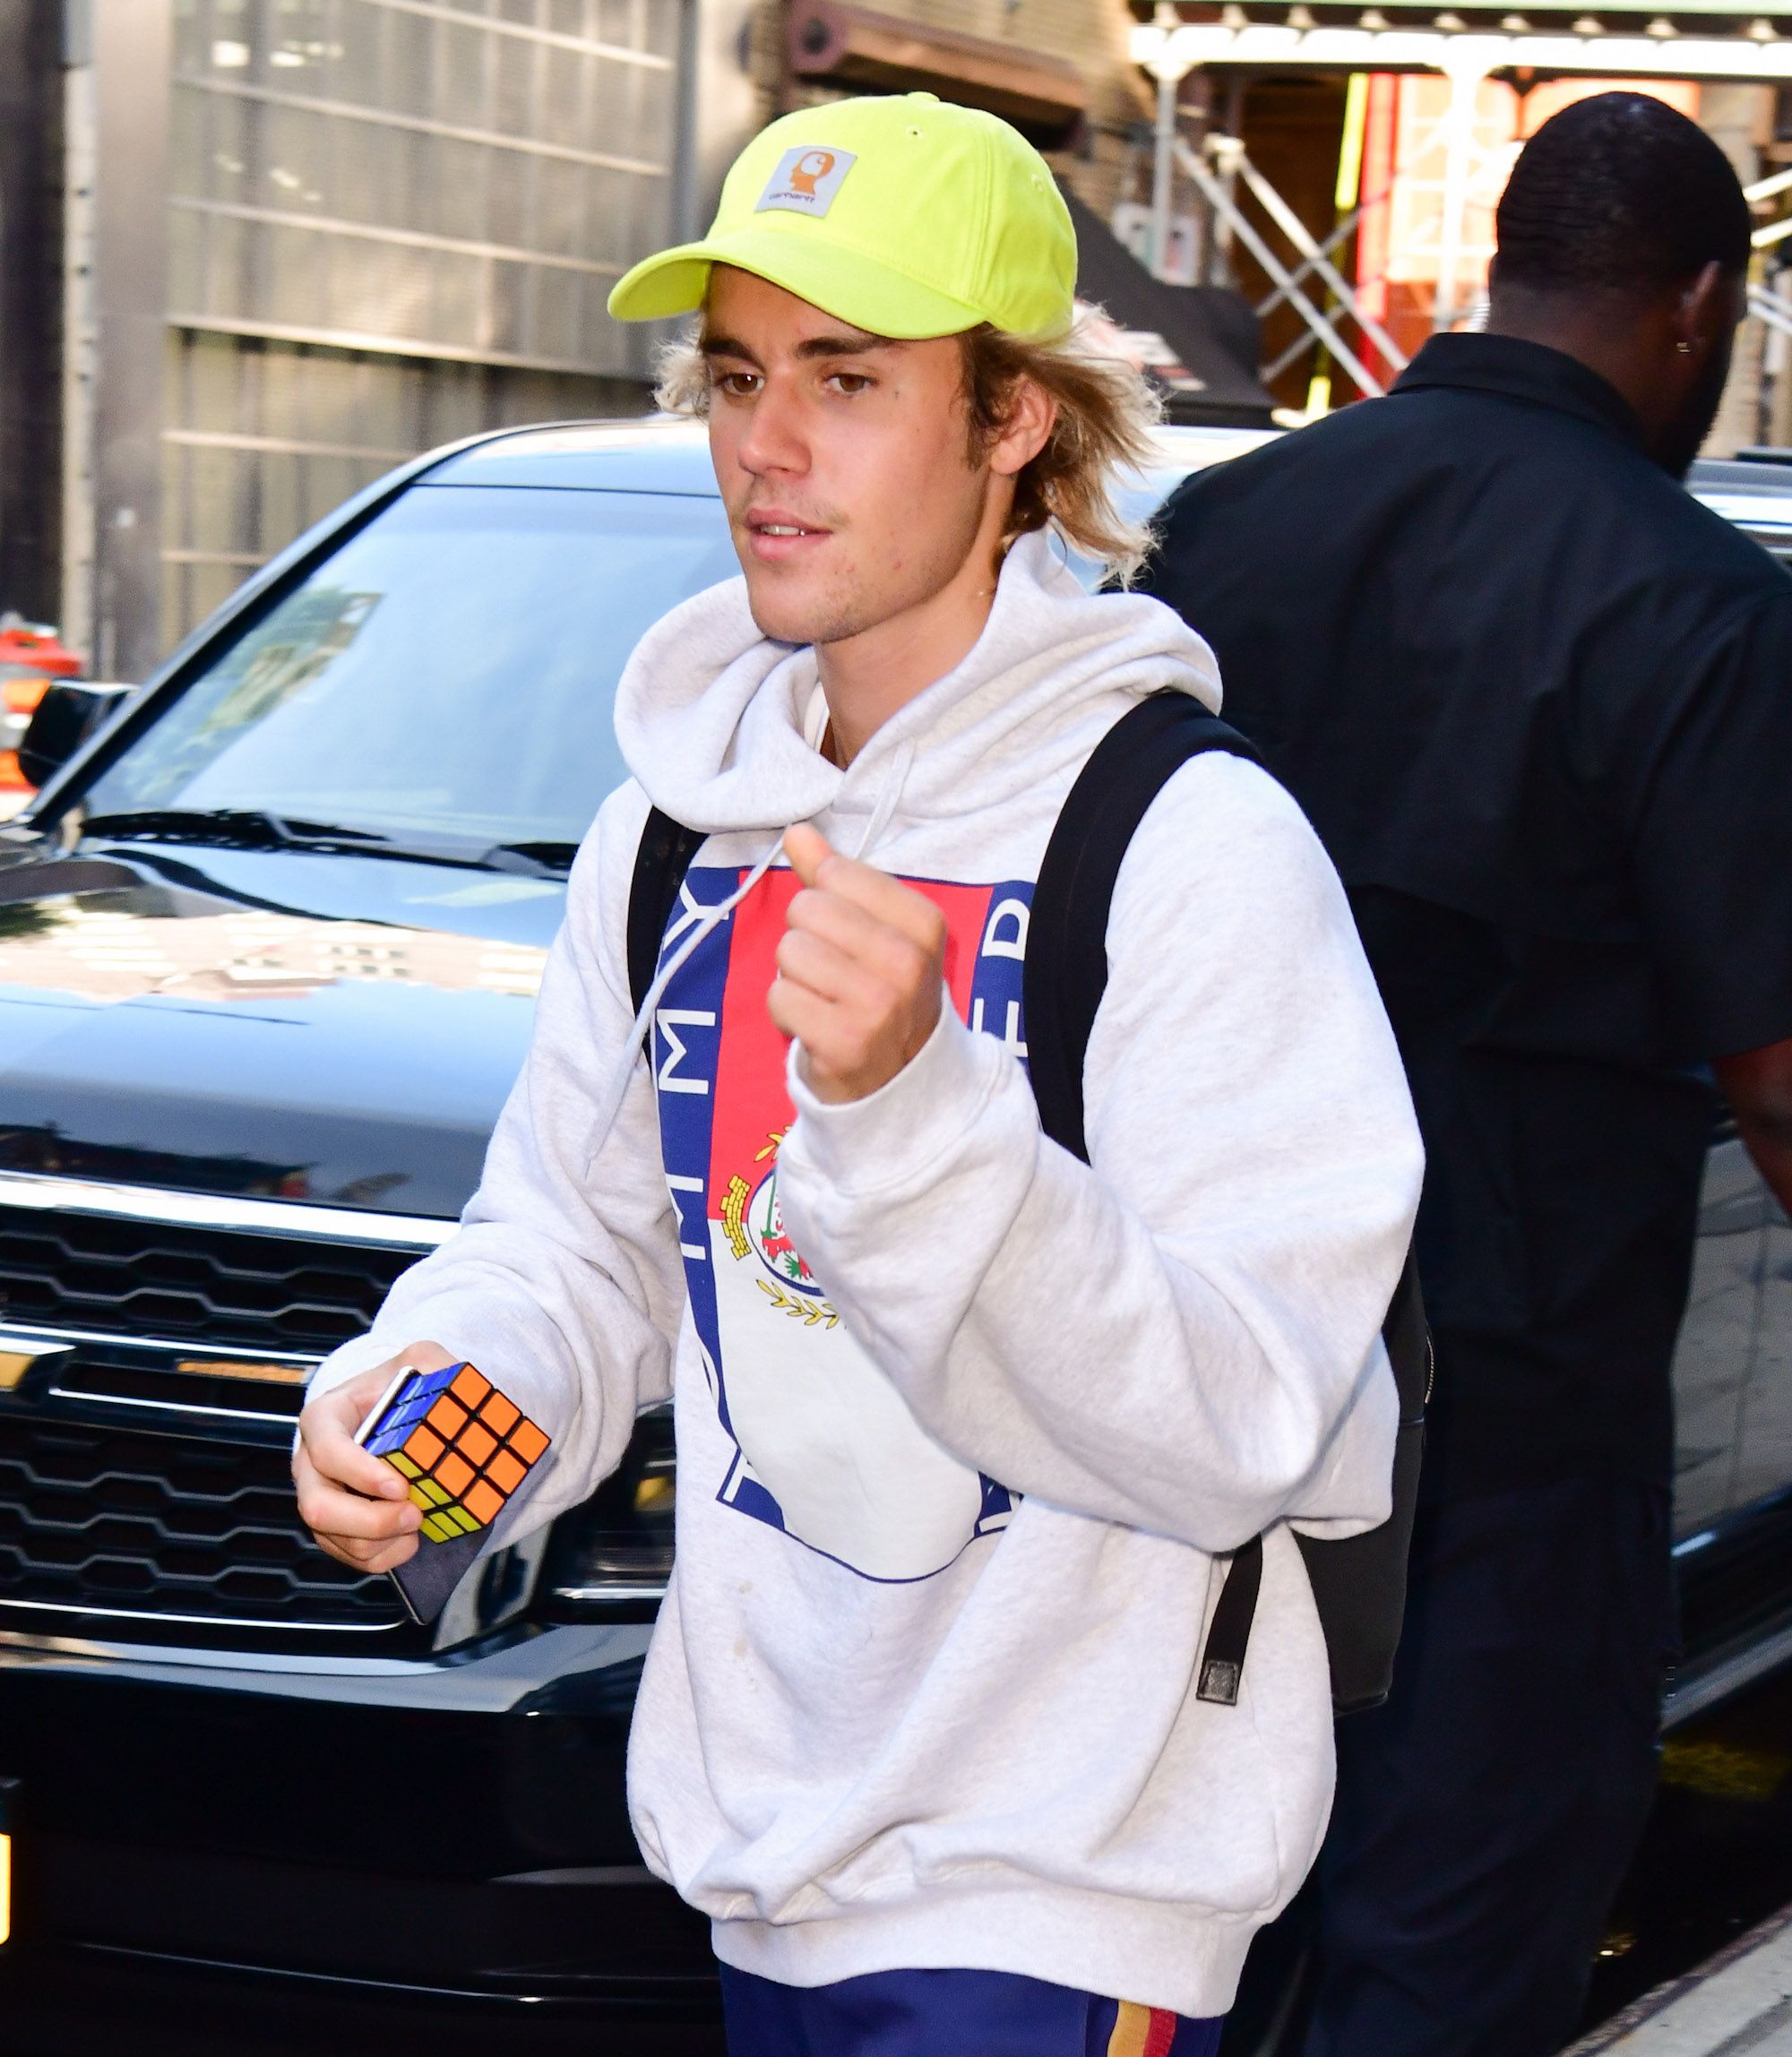 Pete Davidson and Justin Bieber's Style Is On the Rise